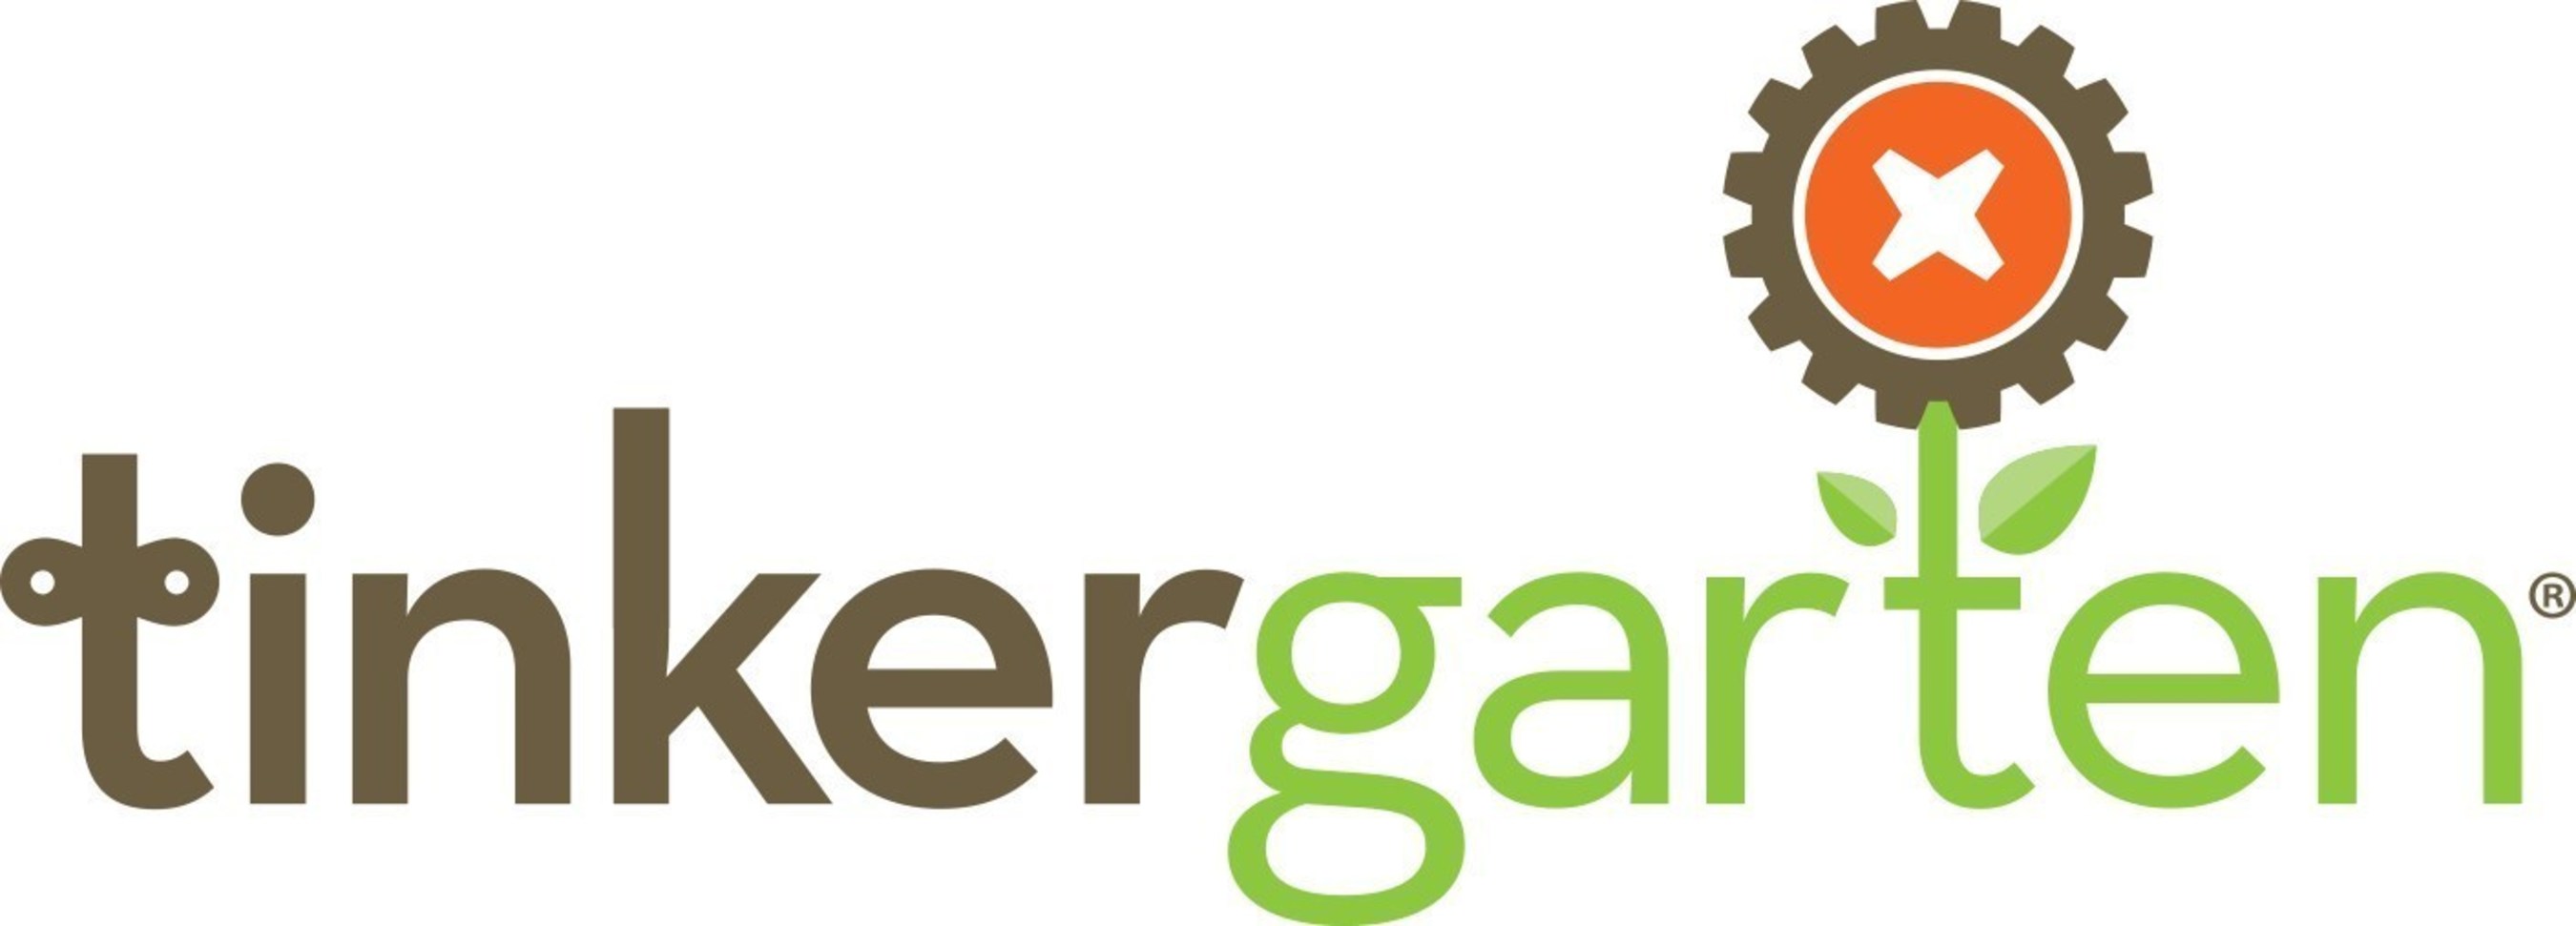 Tinkergarten(R) Fuels Expansion with $1.6m Seed Round Led by Omidyar Network